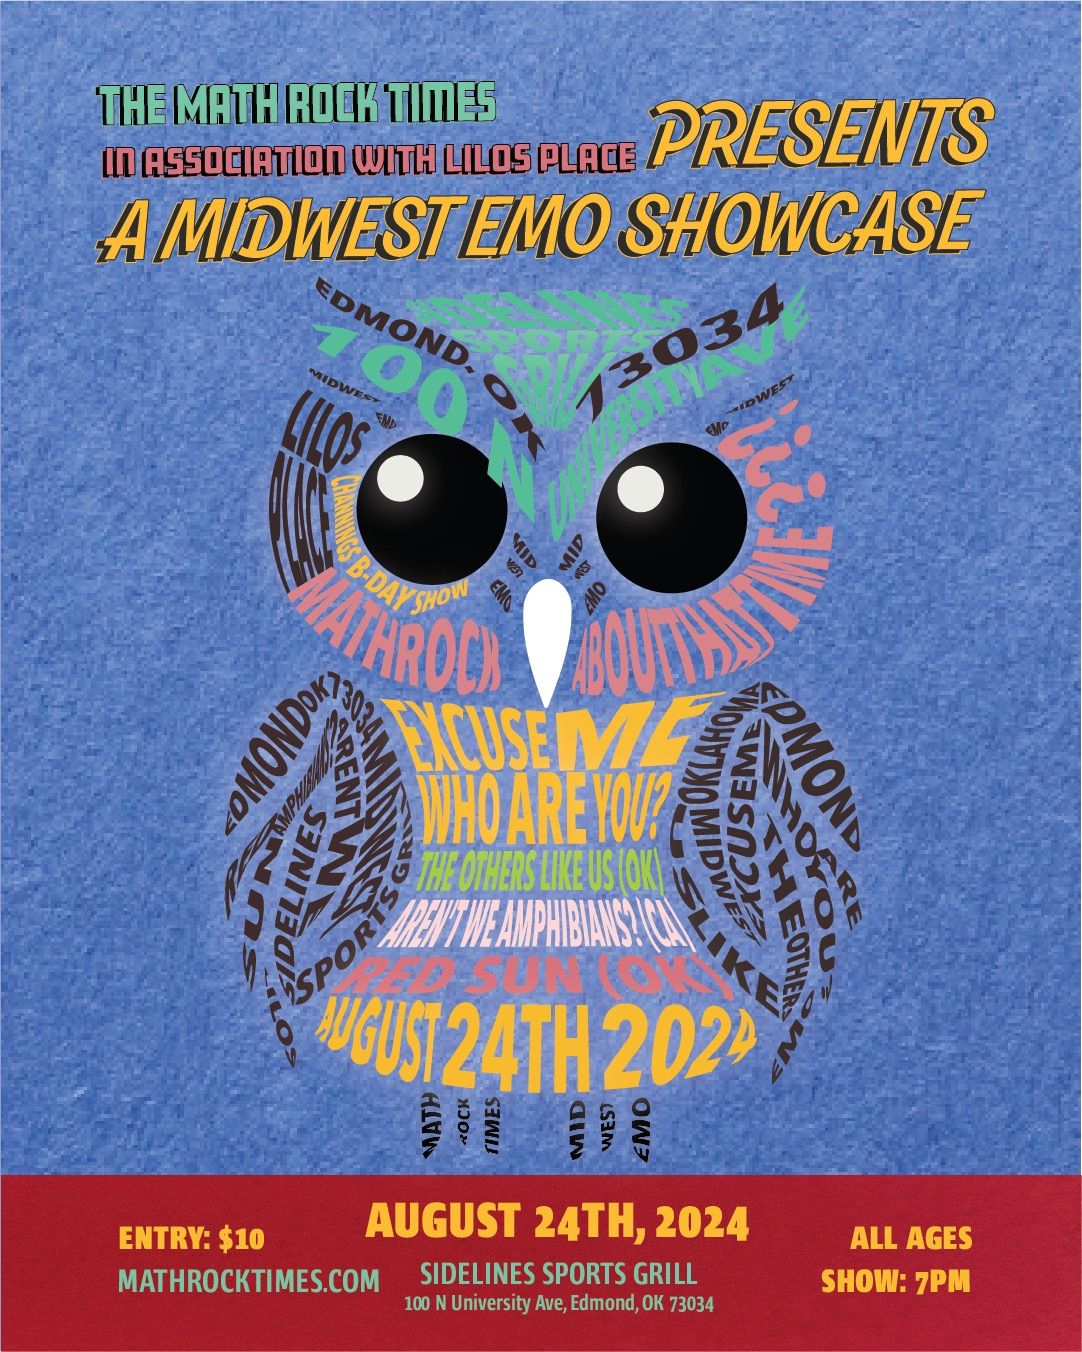 TMRX B-DAY MIDWEST EMO SHOWCASE feat: Excuse Me,Who Are You?-Aren't We Amphibians-The Others Like Us